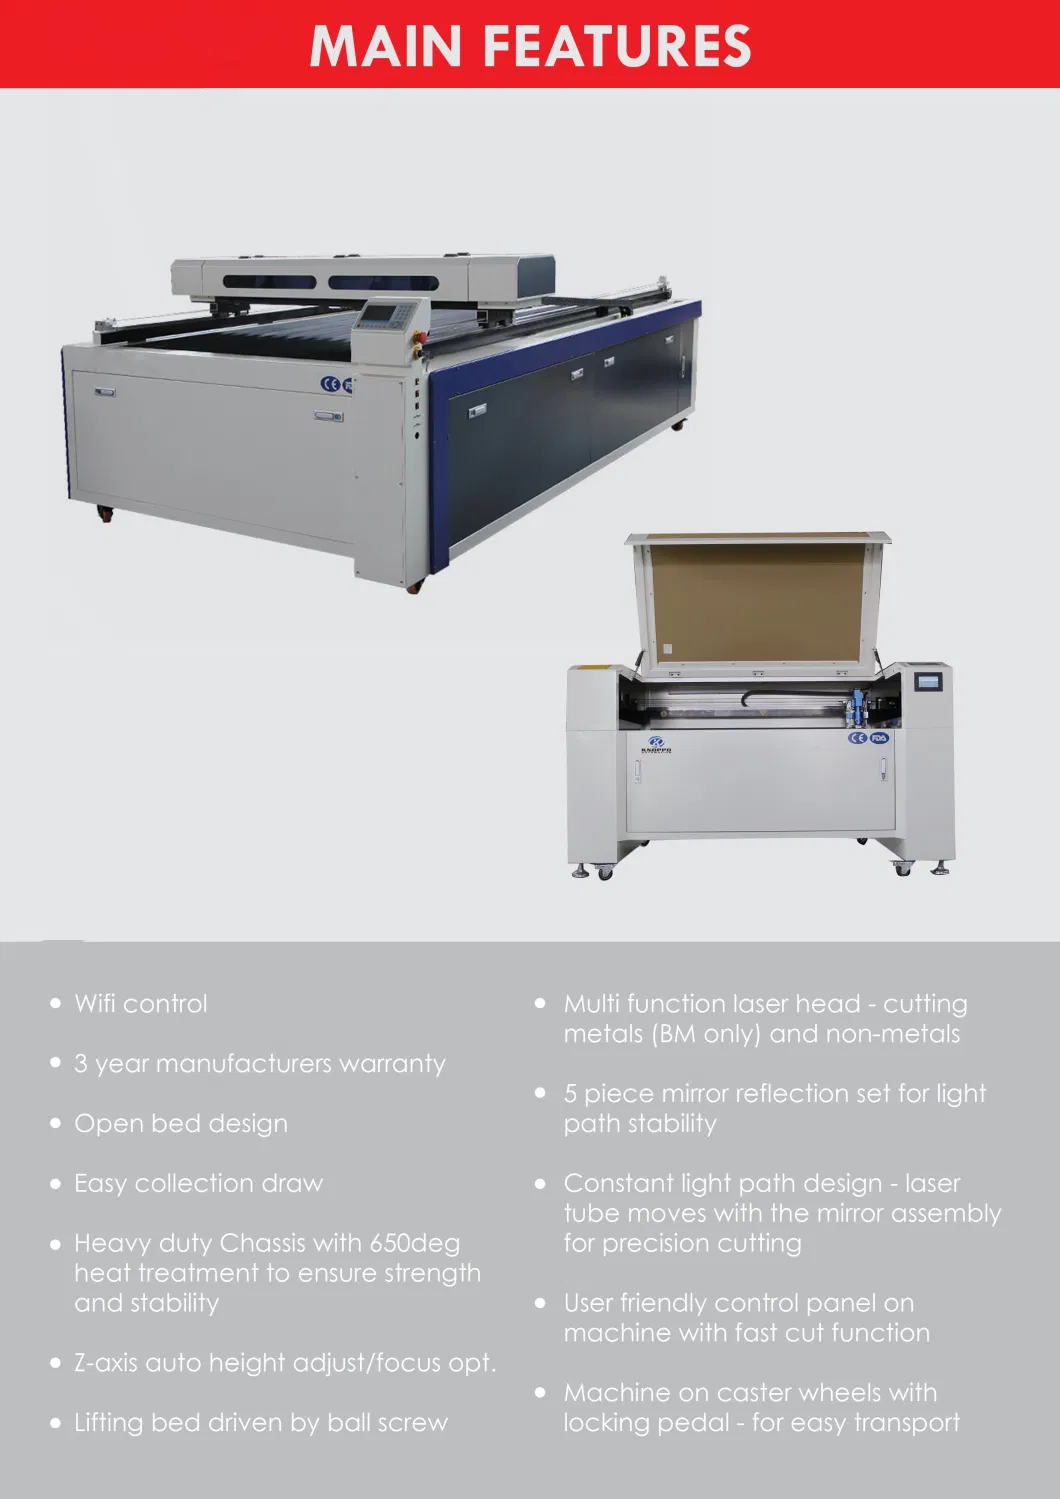 1390 CO2 Laser Cutter CNC Laser Engraving Cutting Machine for Wood Craft Acrylic Plywood Metal and Nonmetal Sheet with Reci Glass Tube and Ruida System